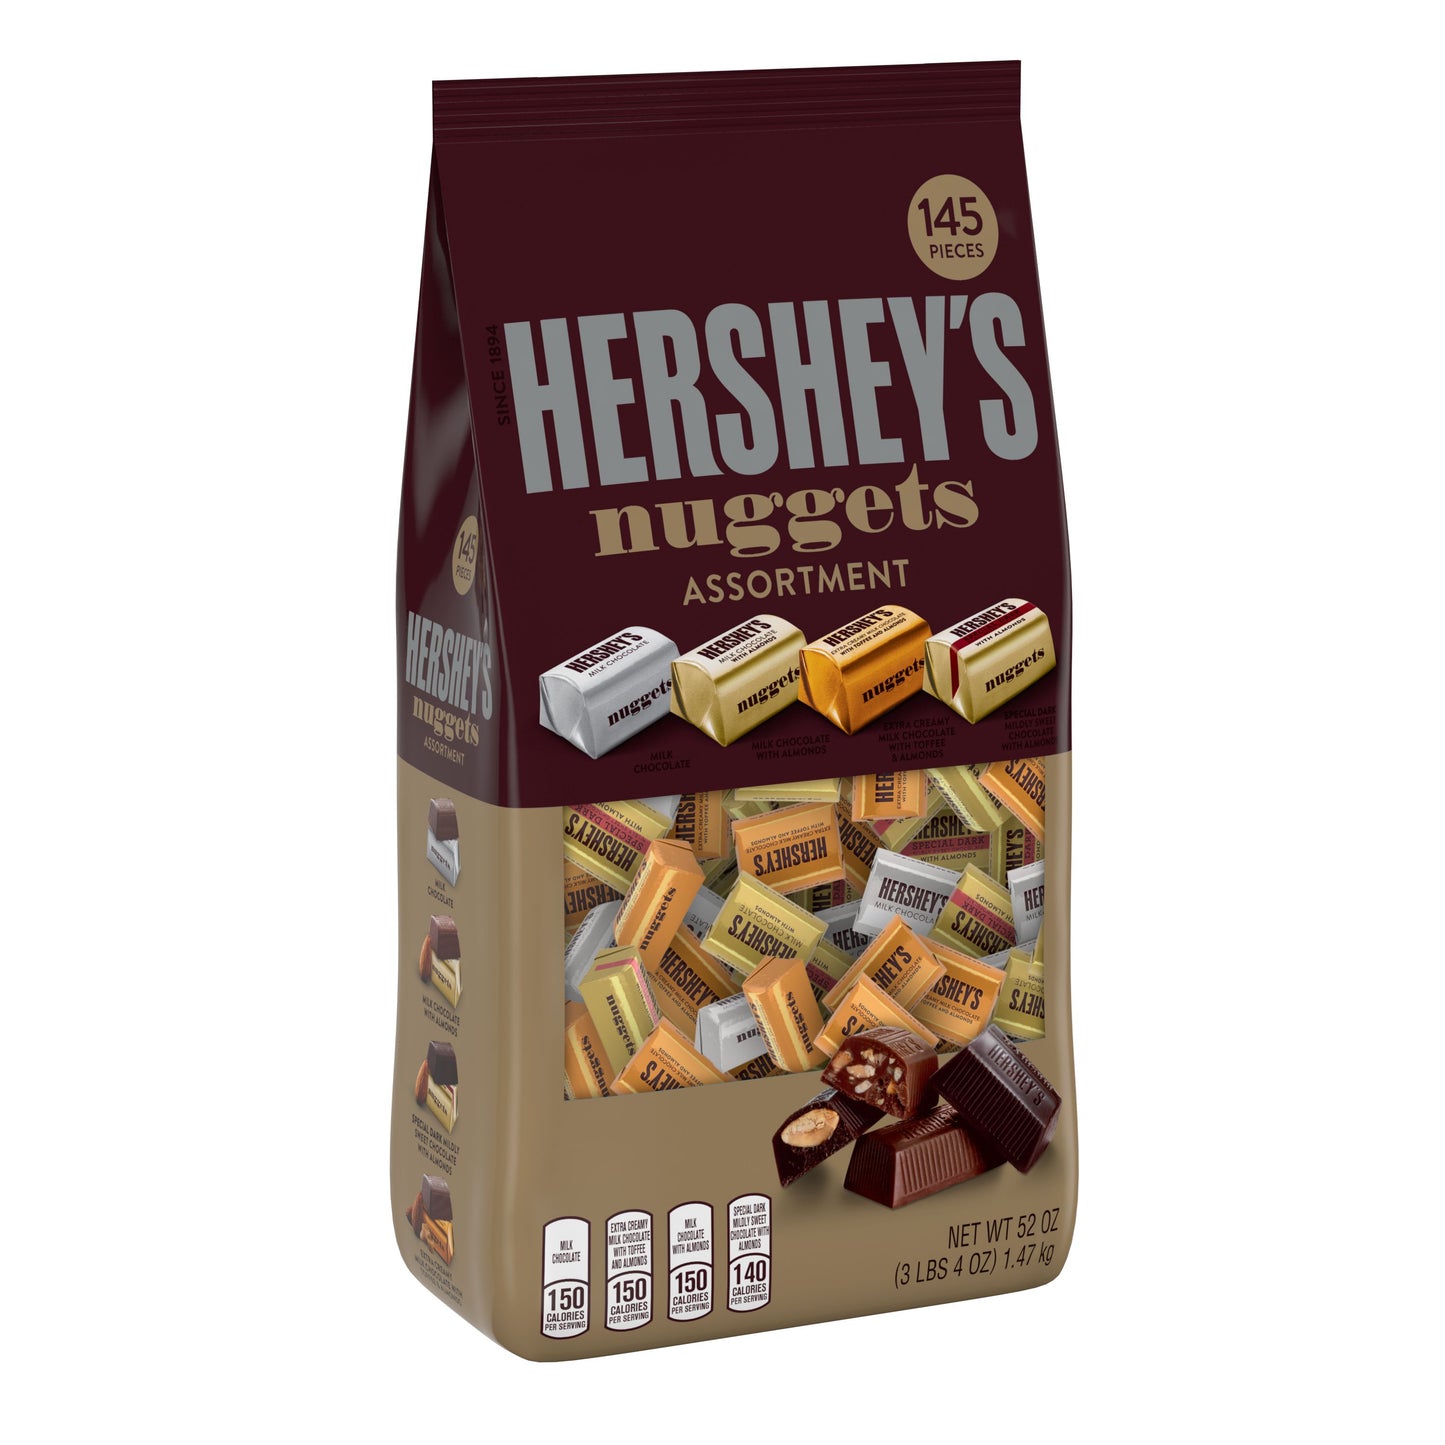 HERSHEY'S NUGGETS Assorted Chocolate Candy, 52 oz Bag, 145 Pieces